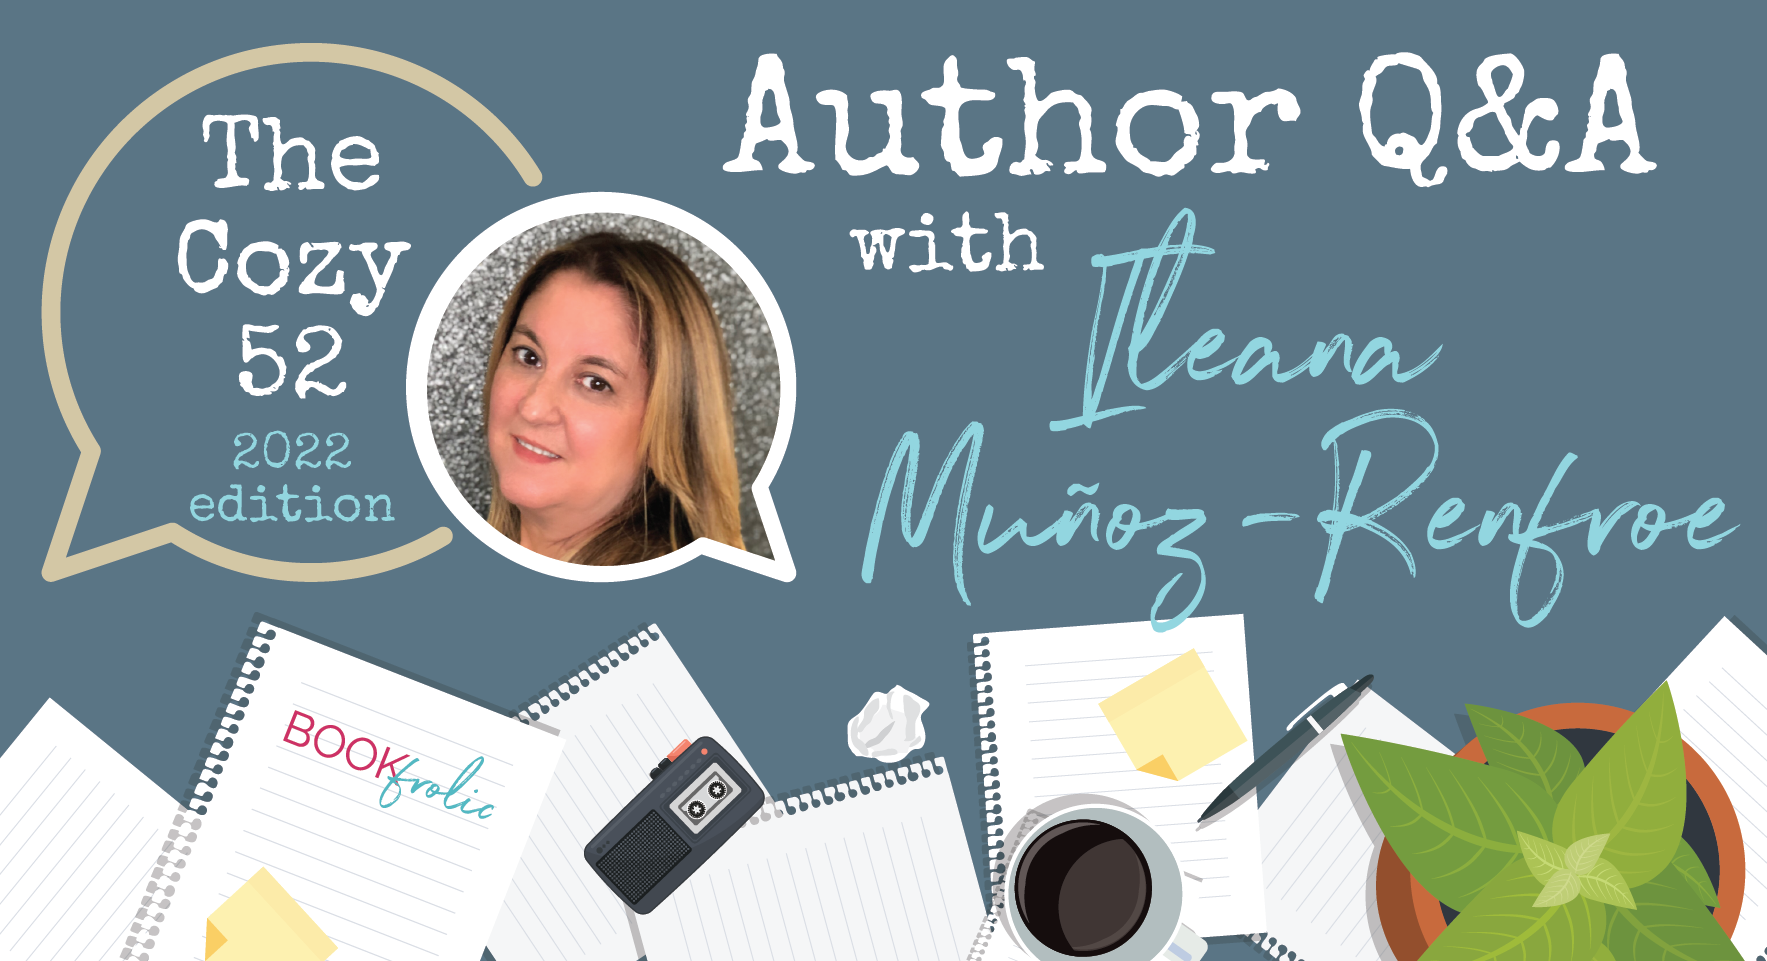 banner for The Cozy 52 - Author Q&A with Ileana Muñoz-Renfroe